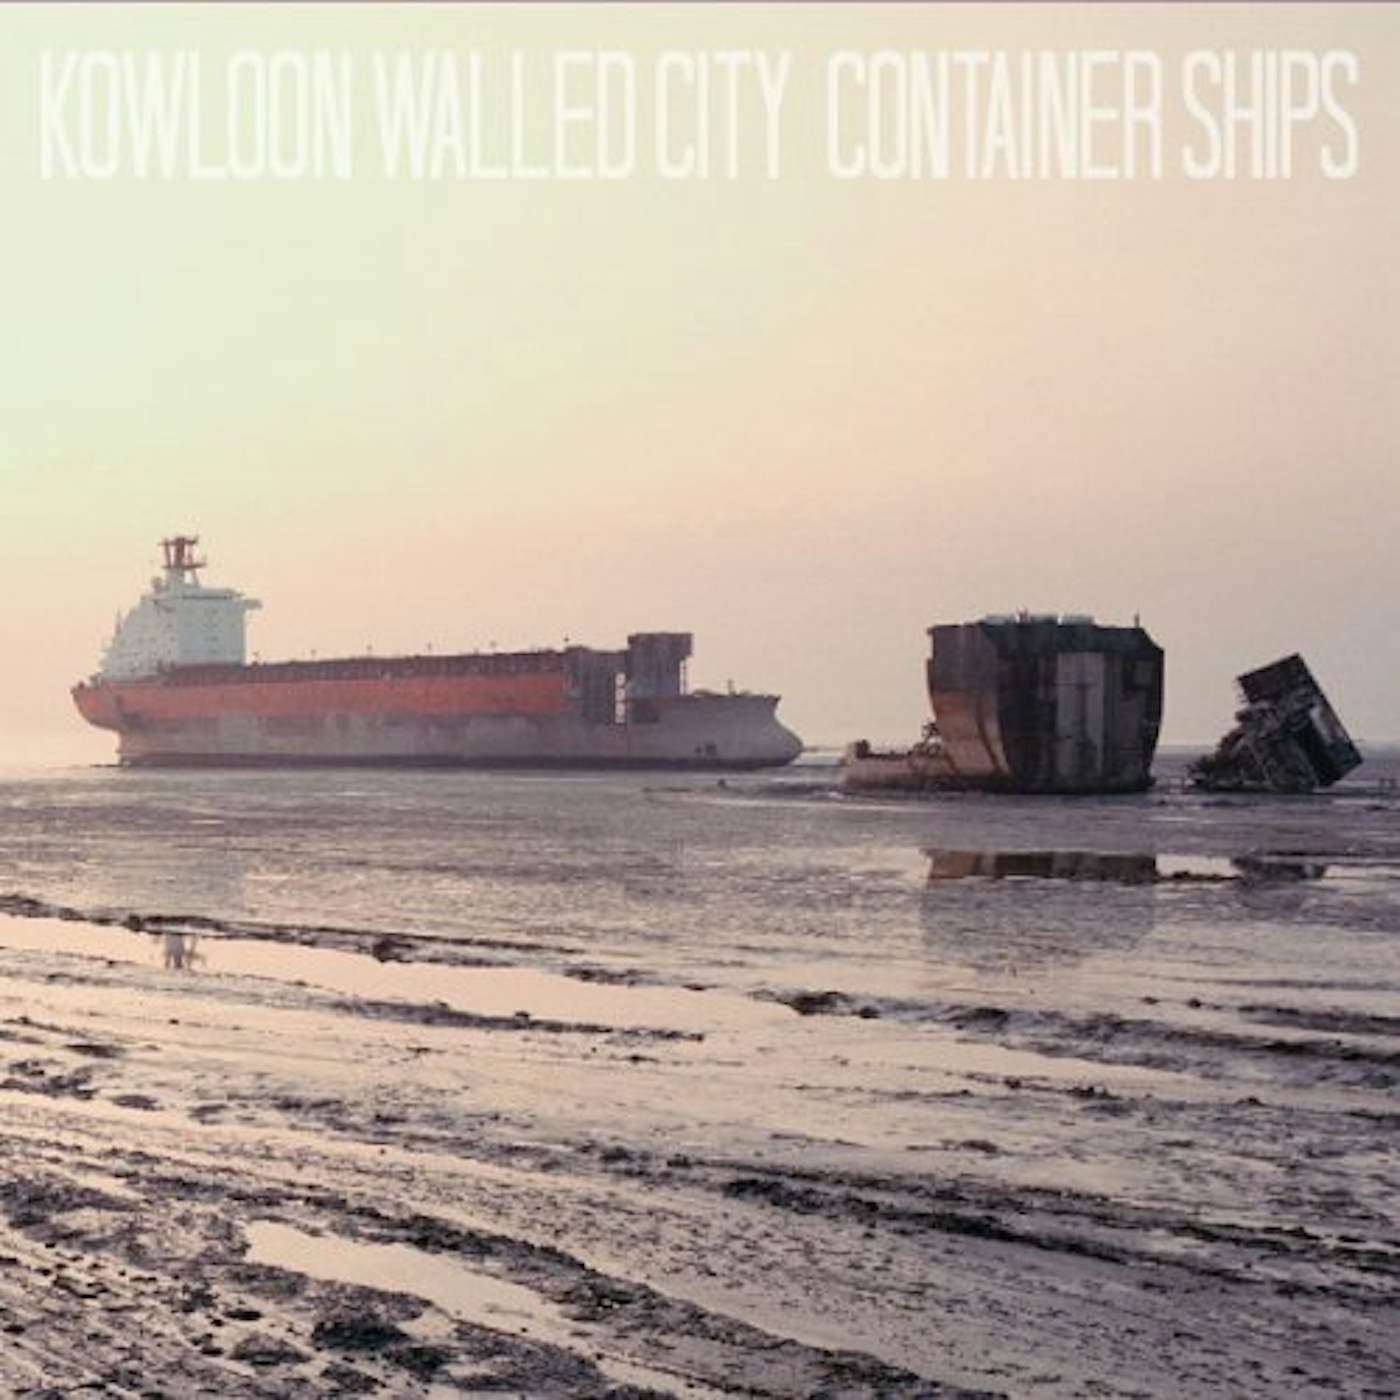 Kowloon Walled City CONTAINER SHIPS Vinyl Record